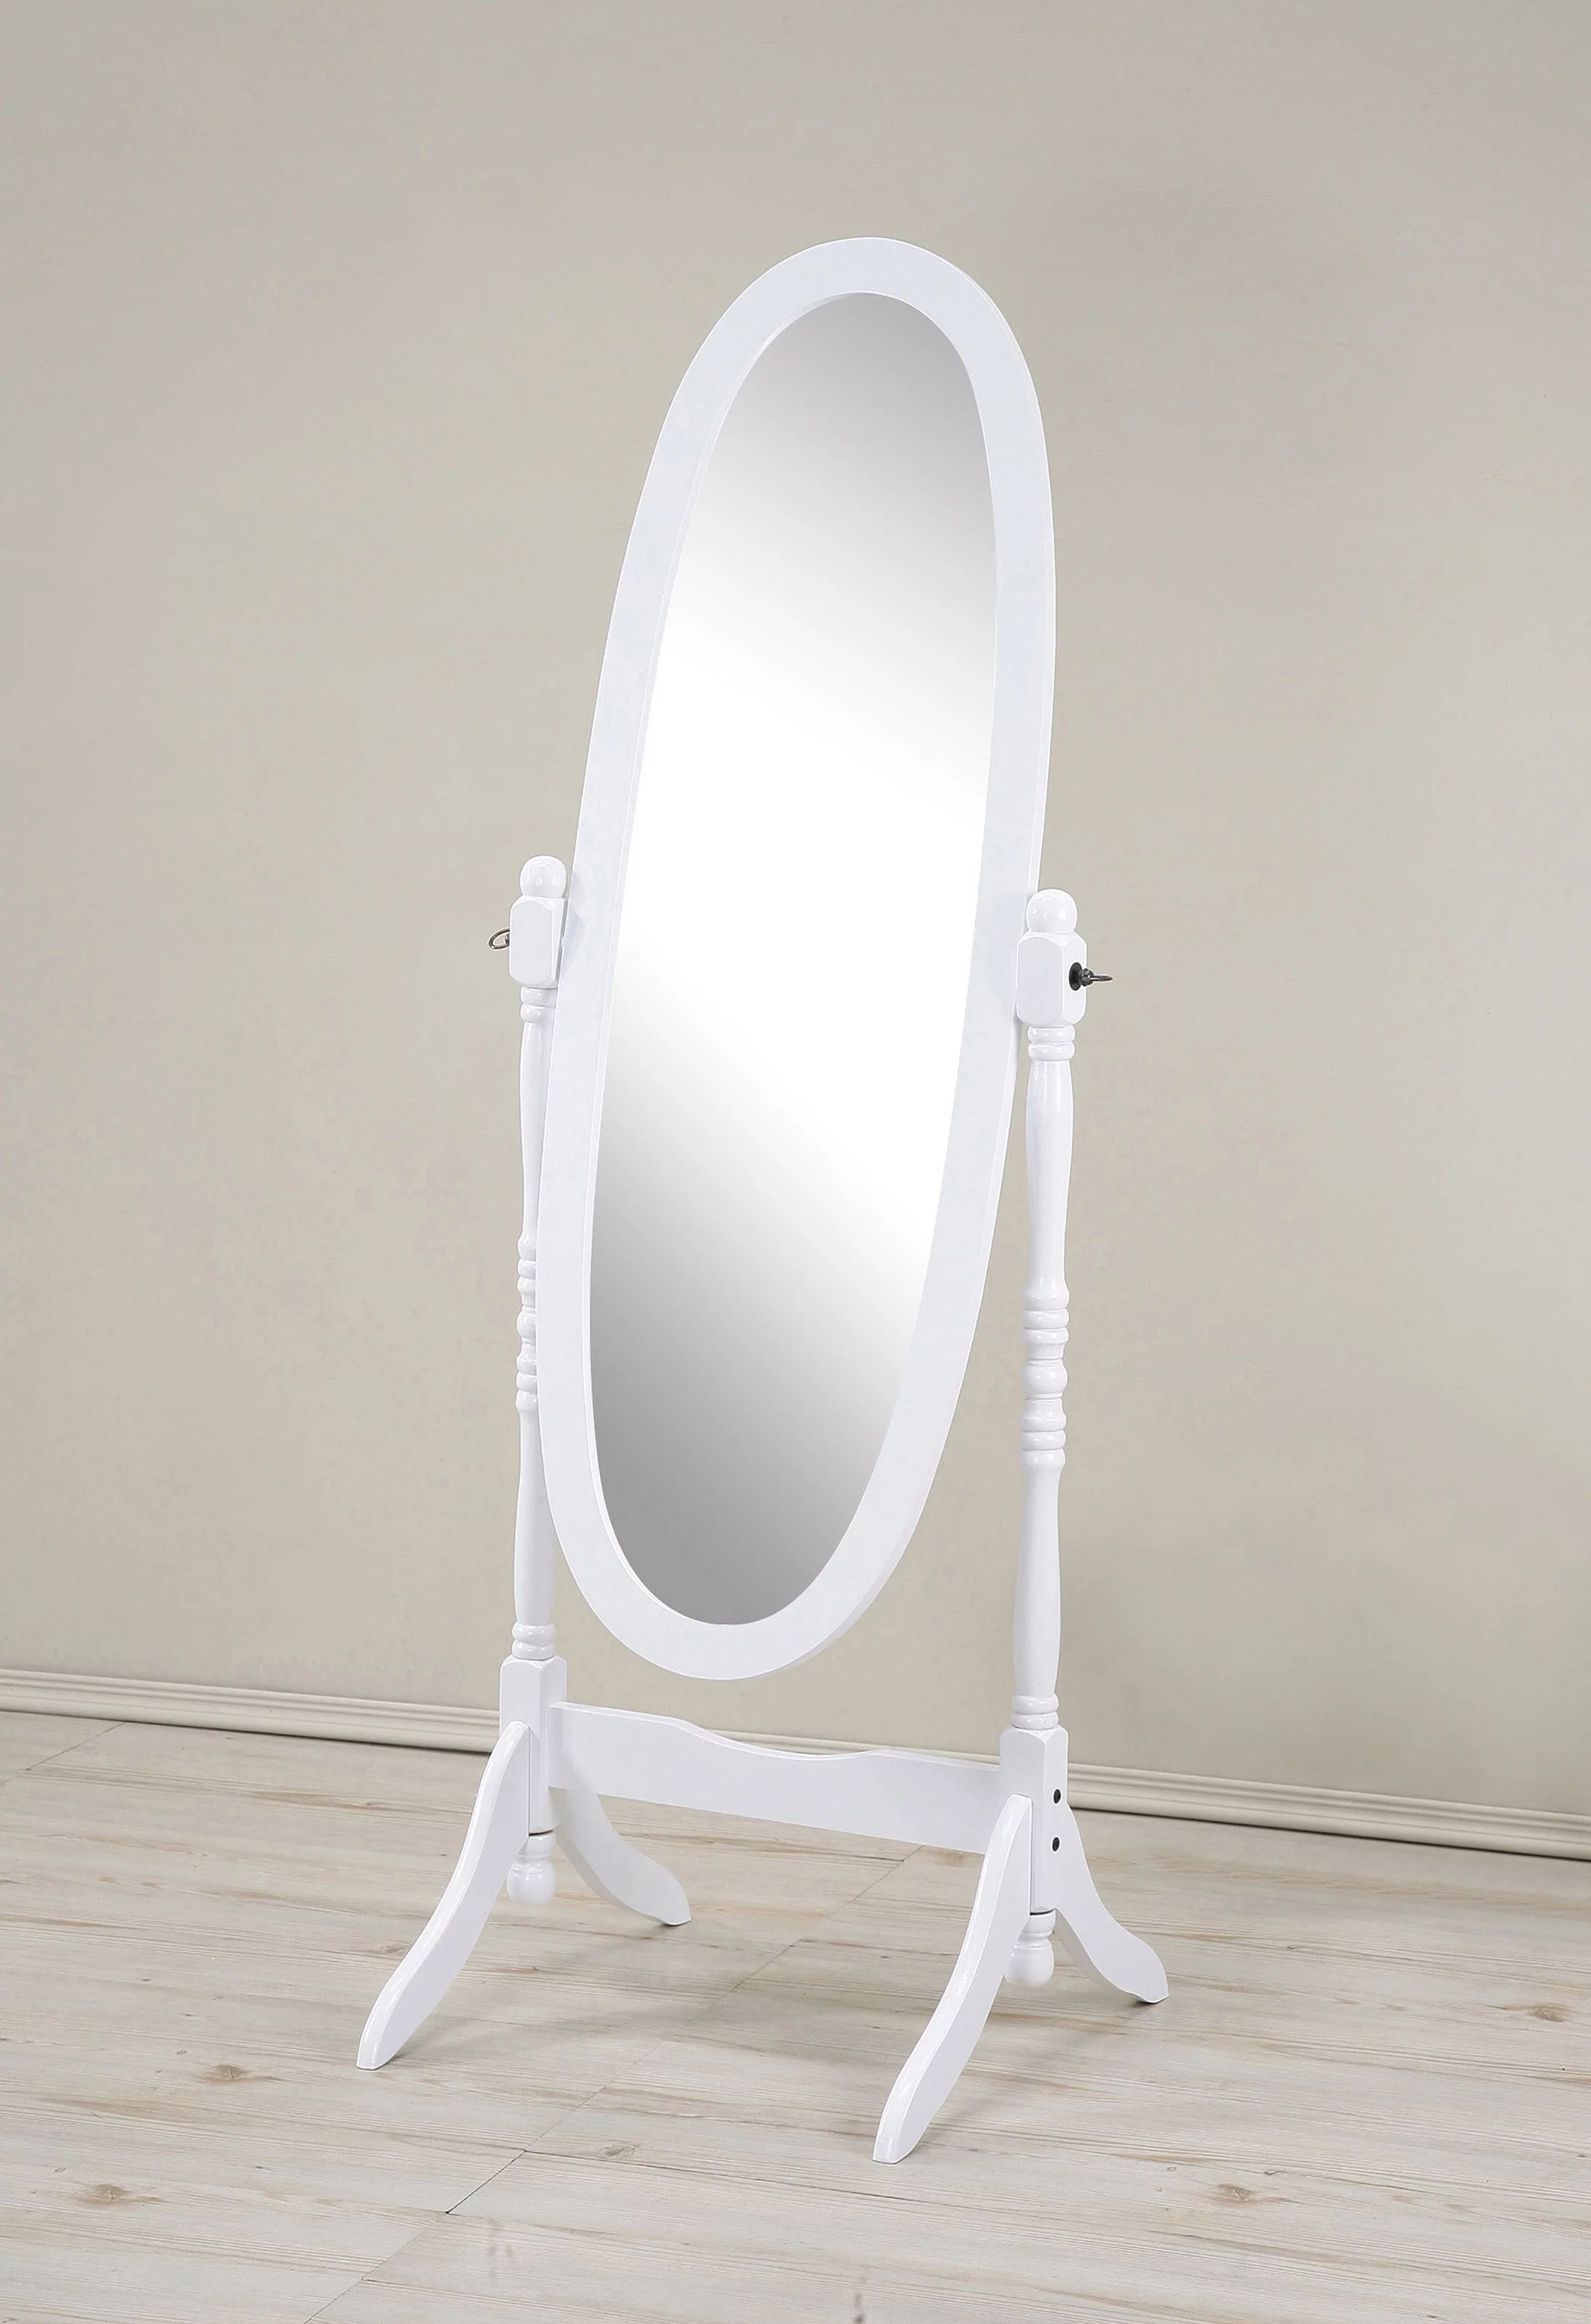 Roundhill Traditional Queen Anna Style Wood Floor Cheval Mirror, White Finish | Walmart (US)